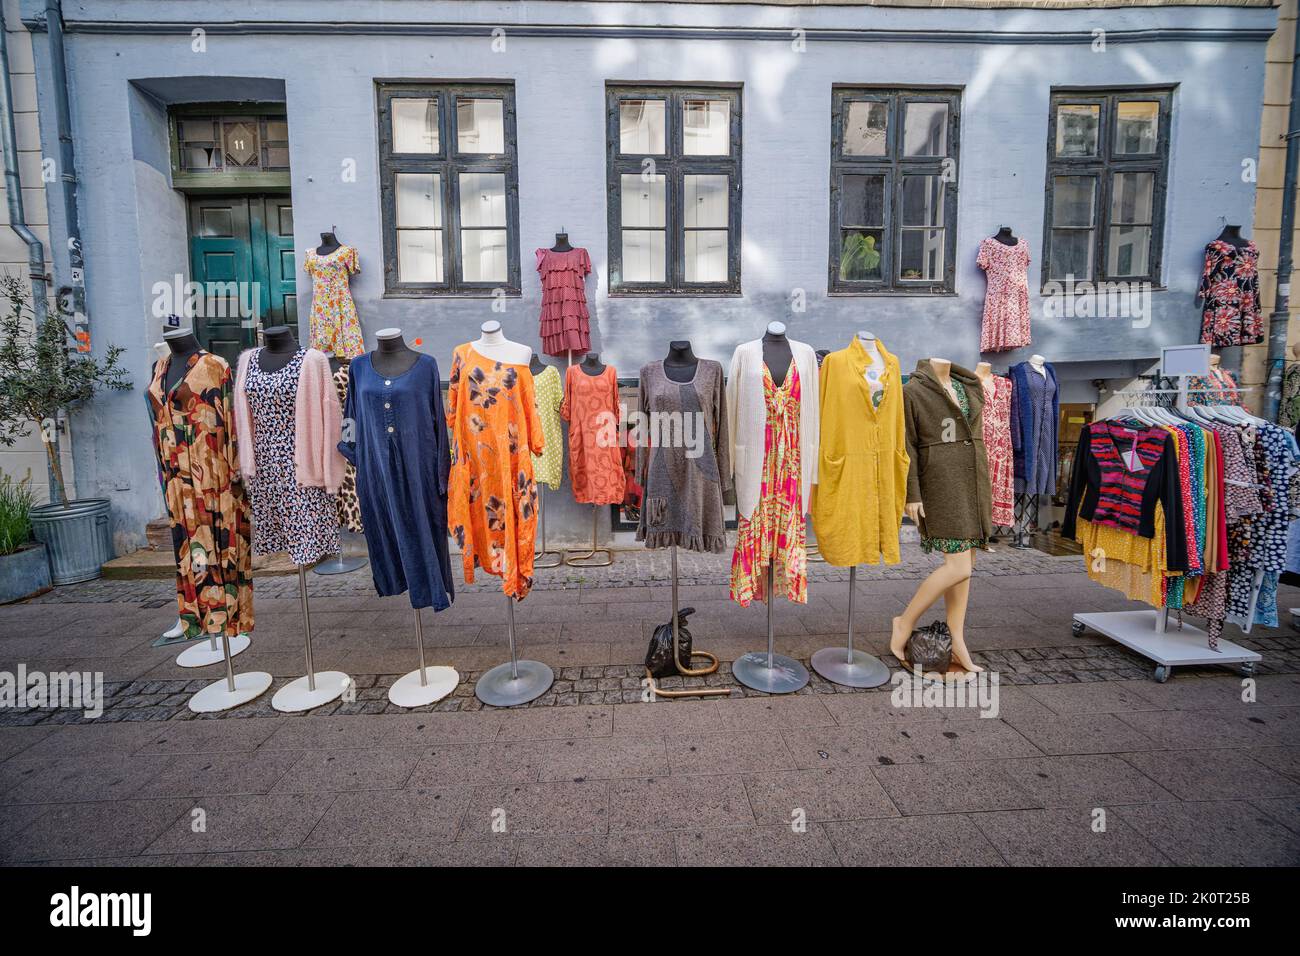 Clothes for sale in the small streets of central Copenhagen, Denmark Stock Photo